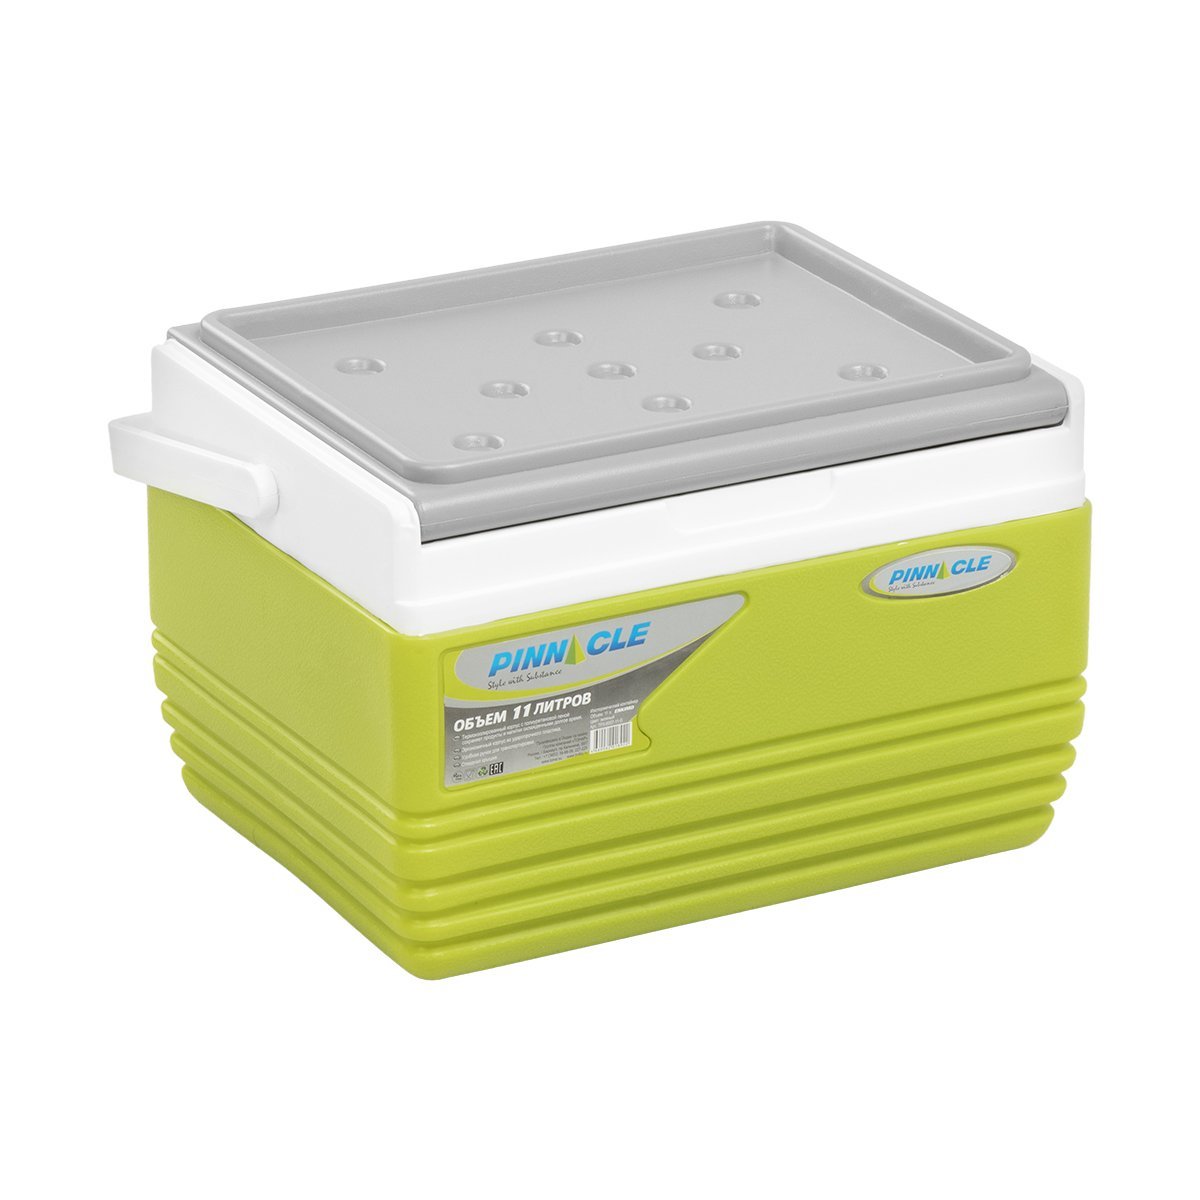 Eskimo Portable Hard-Sided Ice Chest for Camping, 11 qt, Green